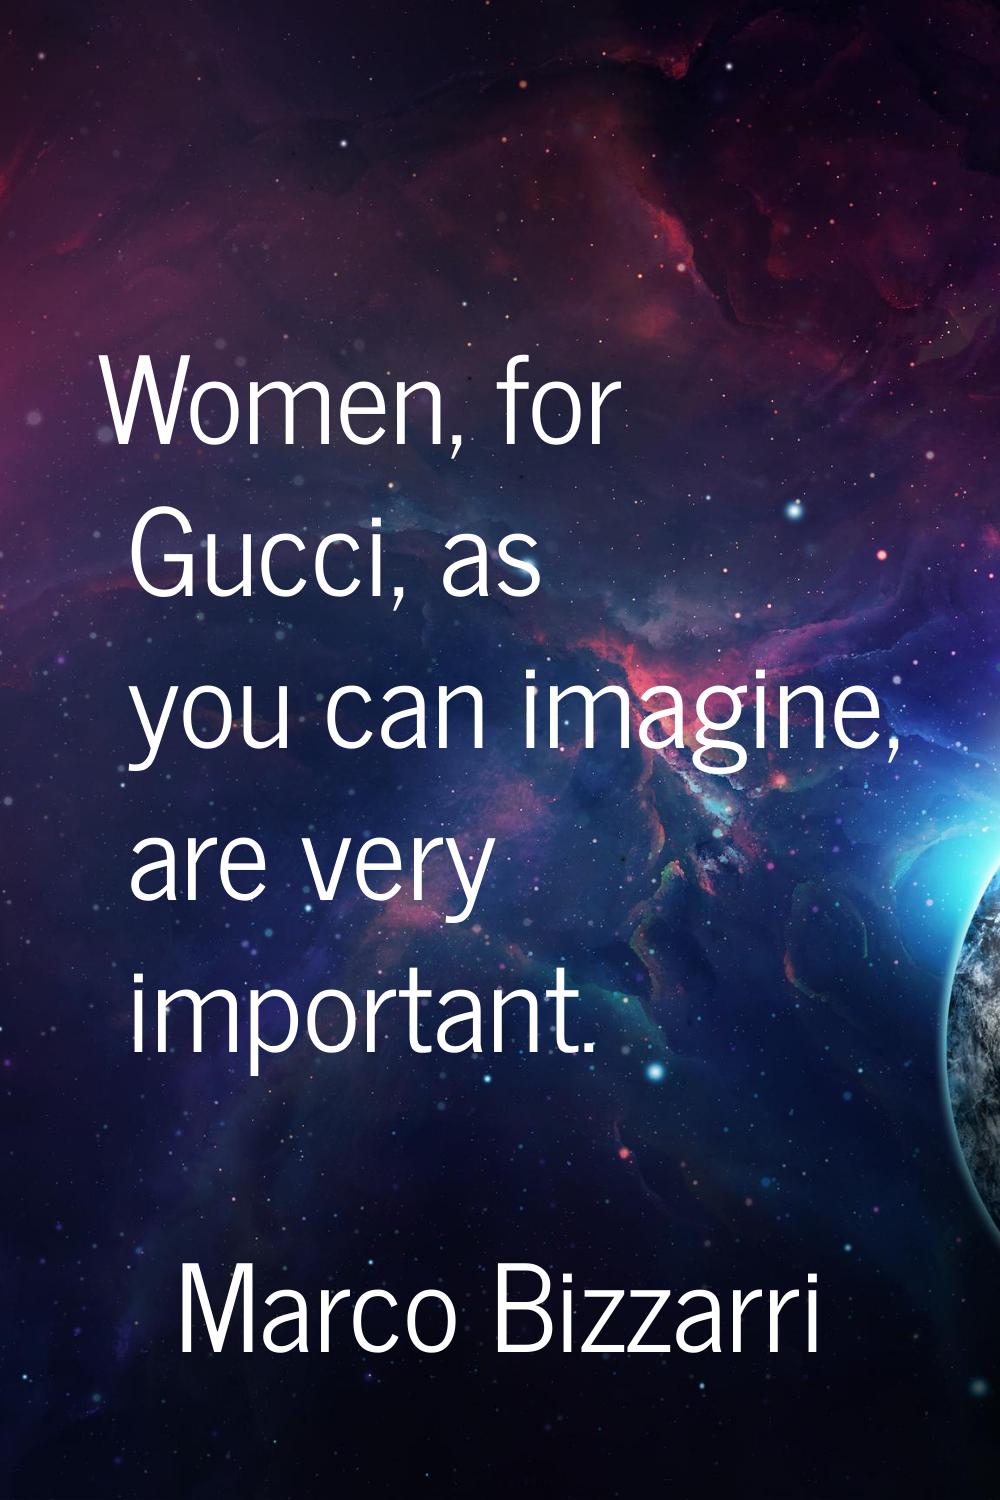 Women, for Gucci, as you can imagine, are very important.